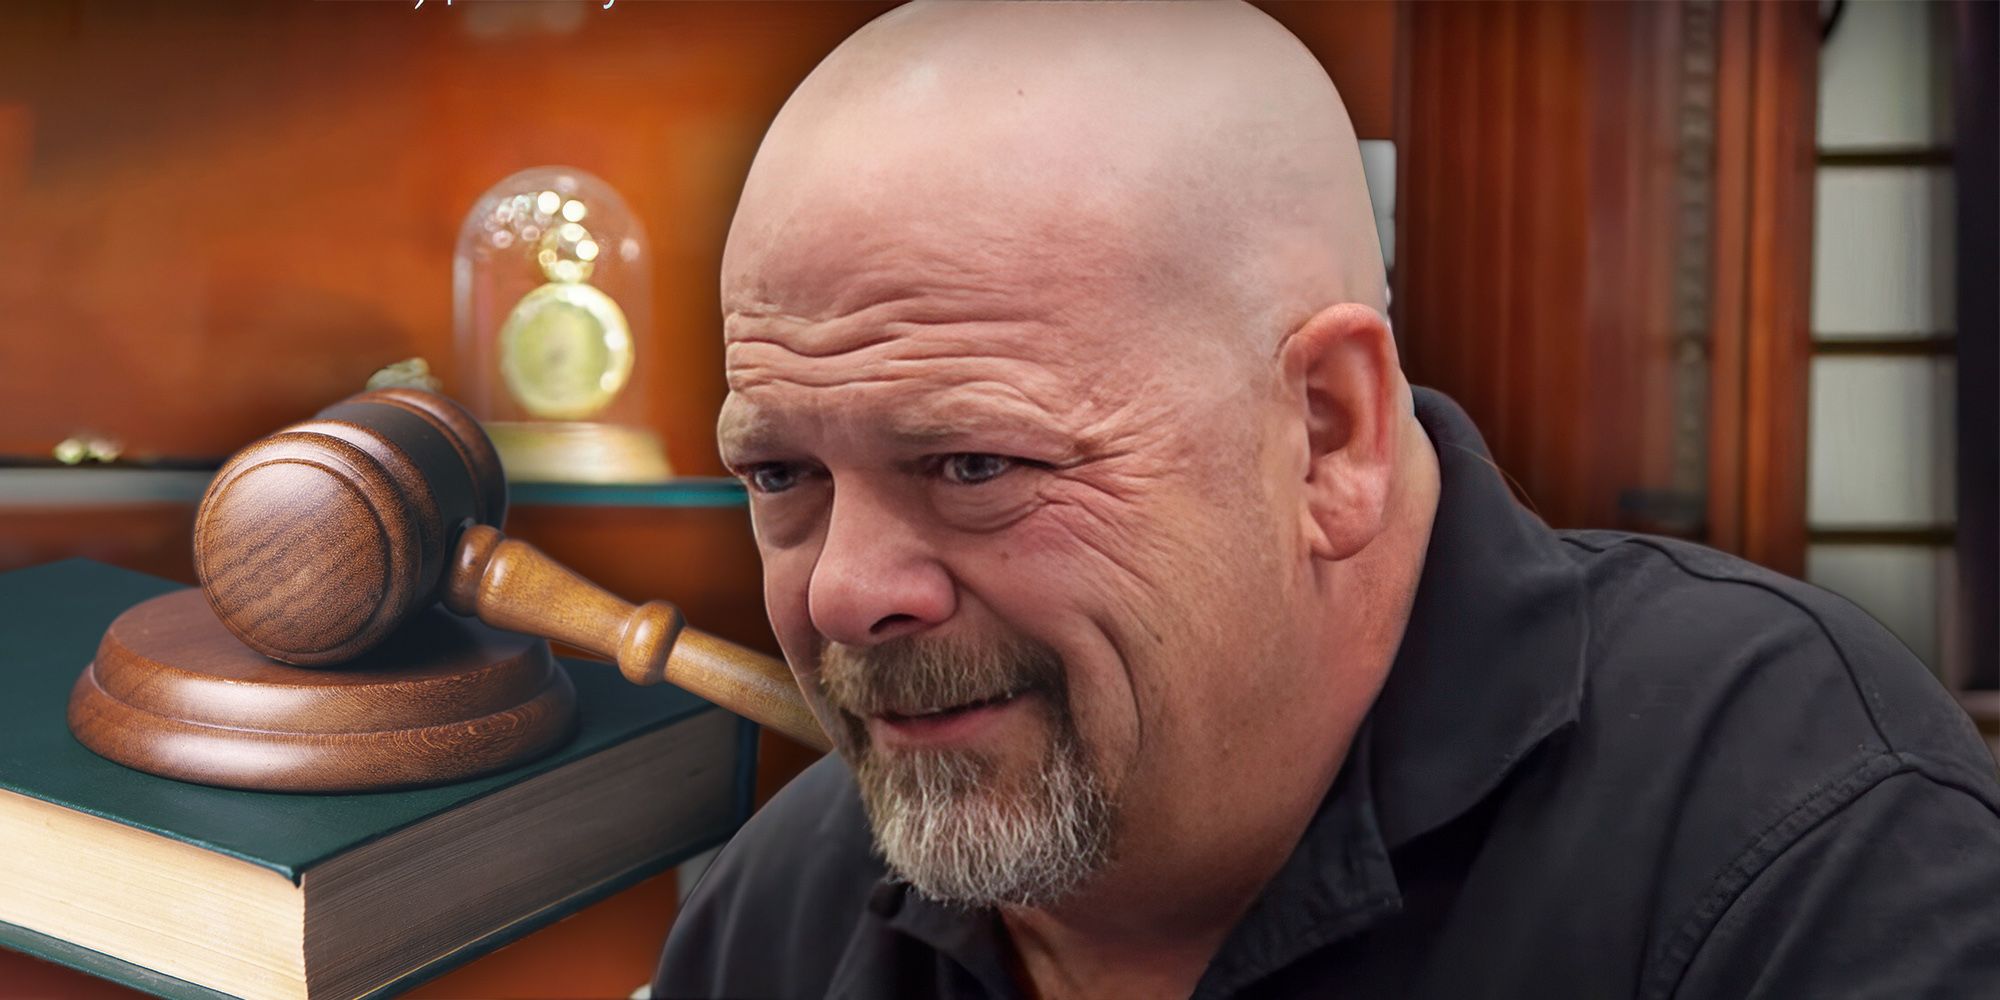 Rick Harrison’s Nasty Legal Battle With His Mother Explained